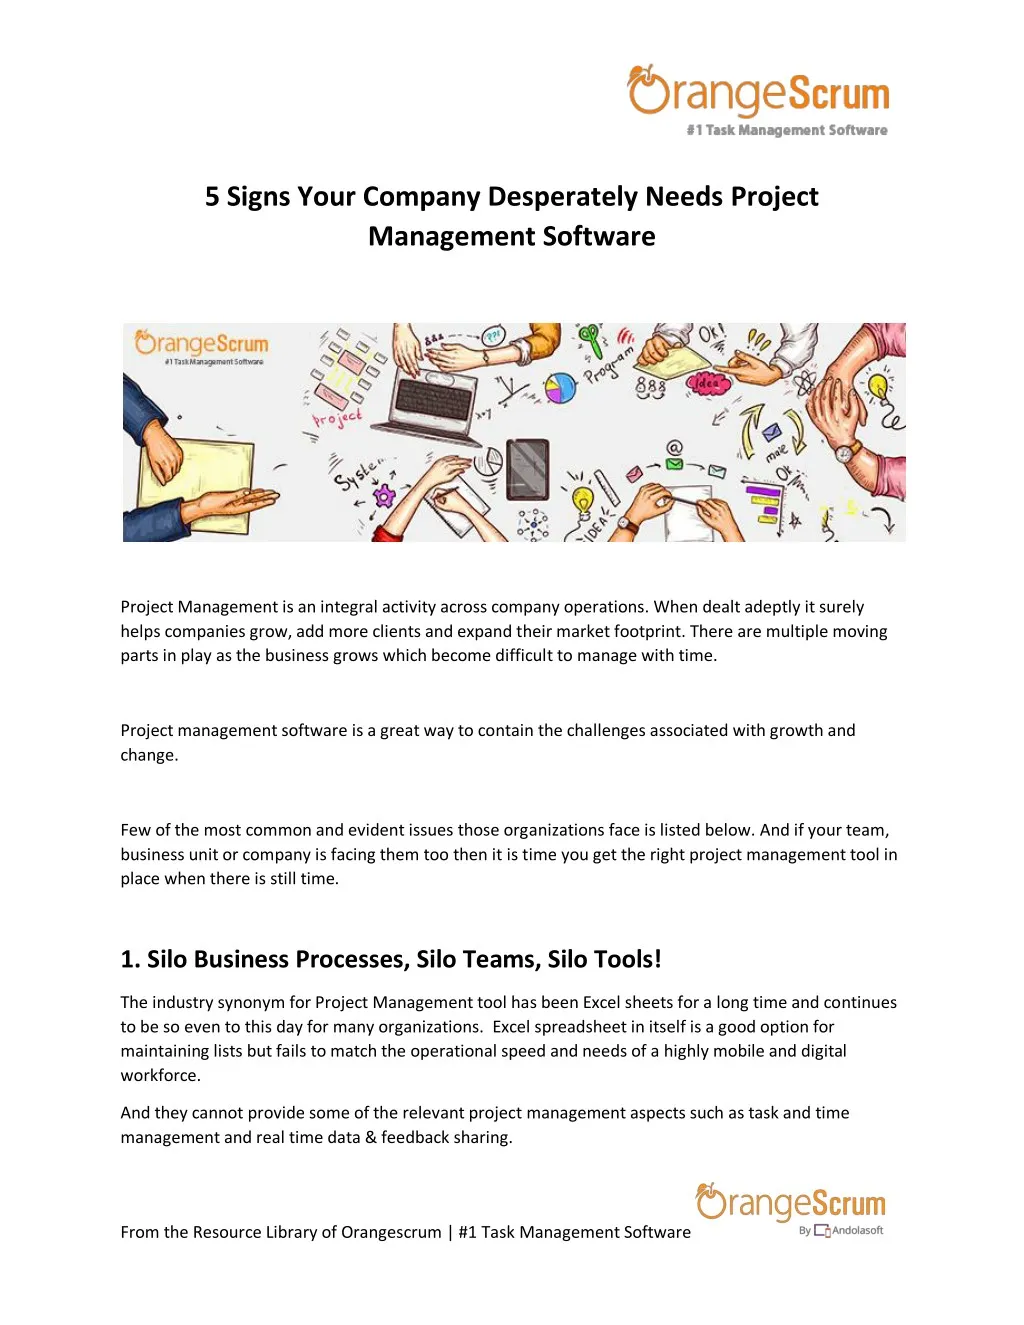 5 signs your company desperately needs project